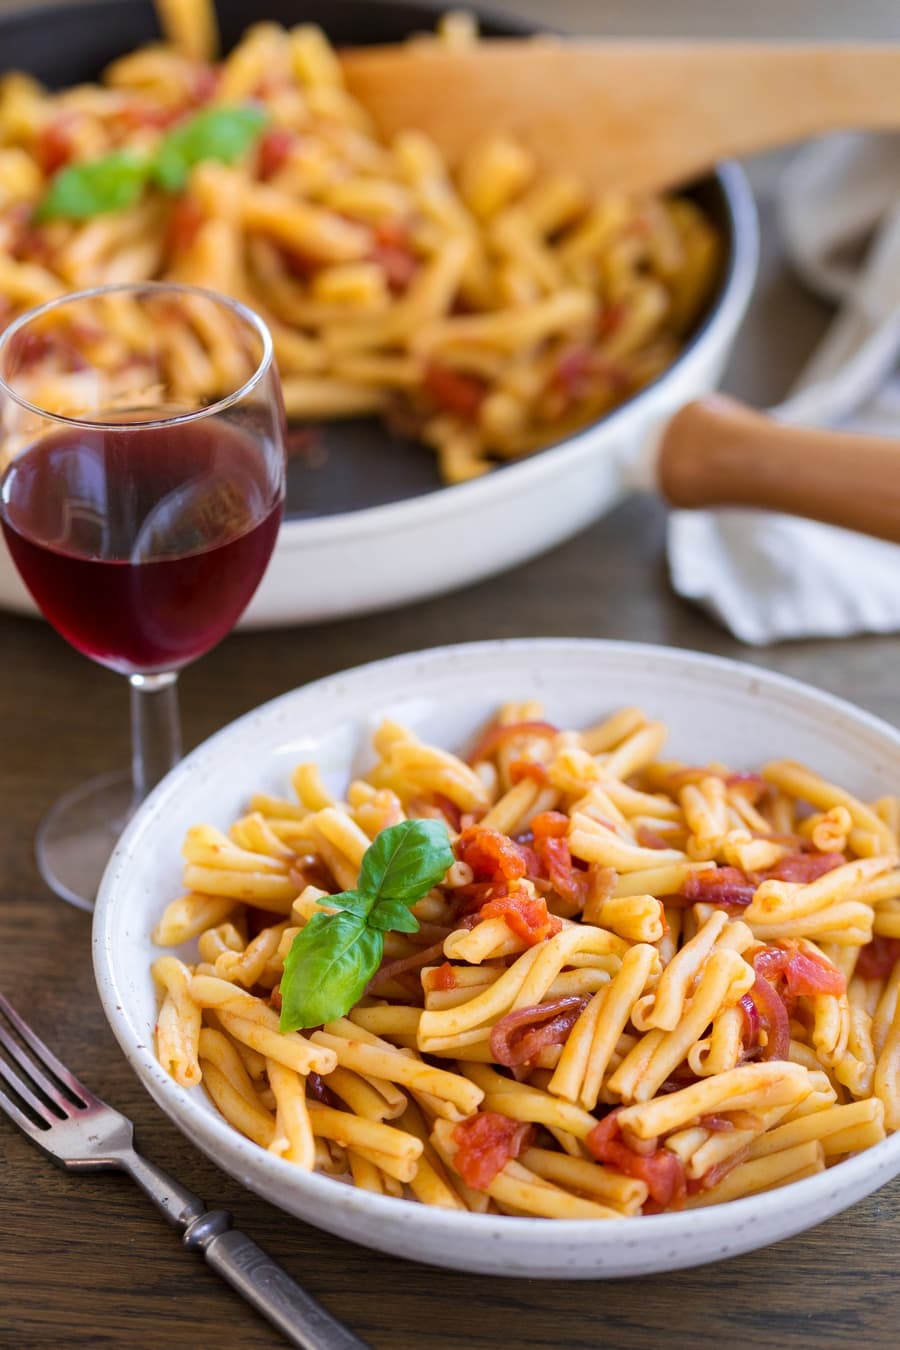 Balsamico pasta with onions and tomatoes served in a bowl, pan containing same food in the background, glass of red wine.